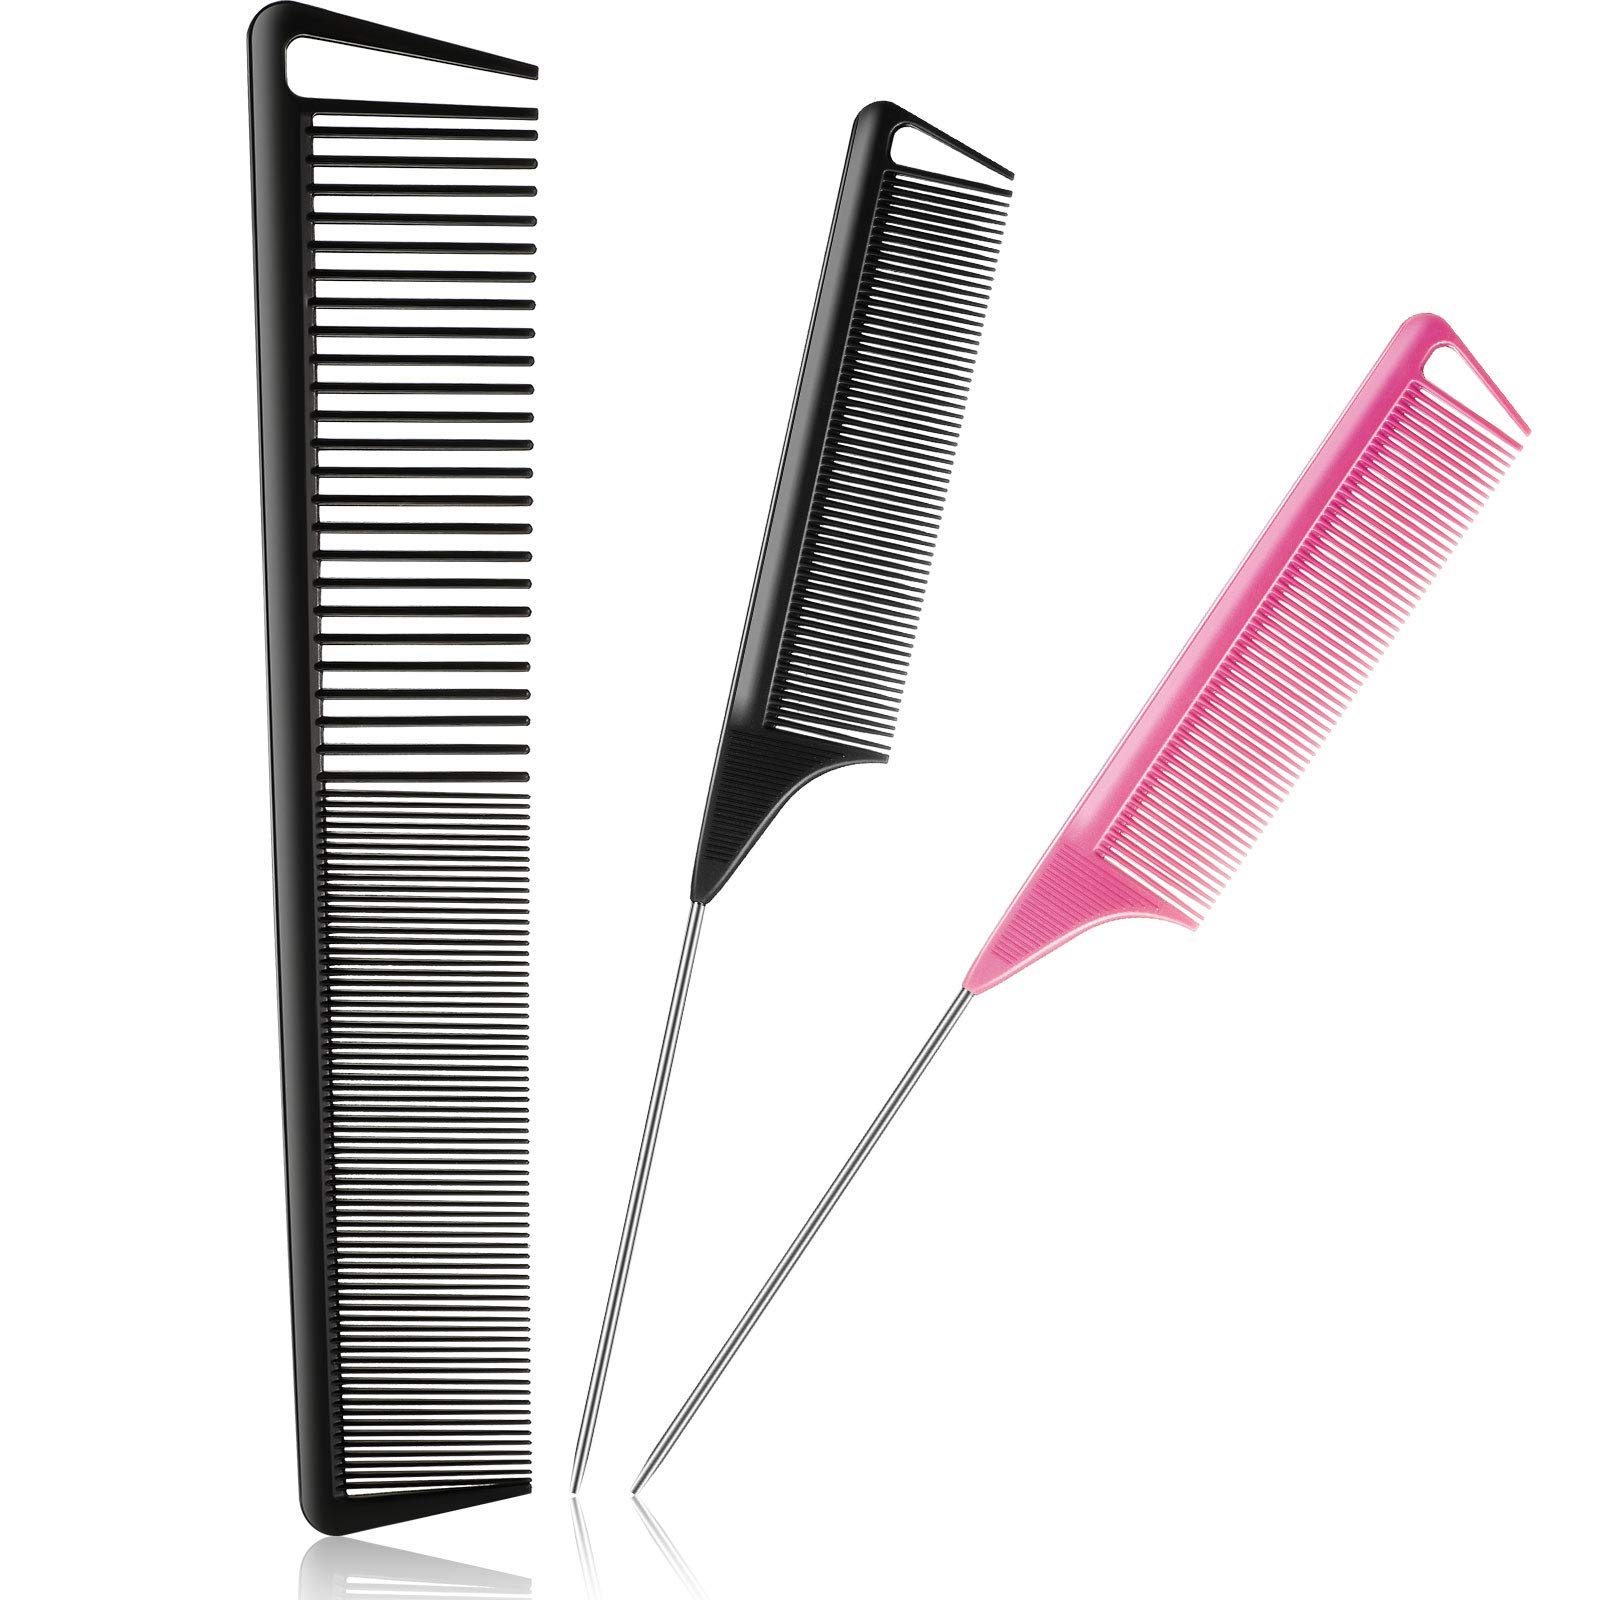 3 Pieces Pintail Comb Rat Tail Comb Carbon Fiber Cutting Comb Set Stainless  Steel Pintail Comb Teasing Comb Parting Comb Wide and Fine Teeth Comb for  Braids Hair Salon Home Supplies Black